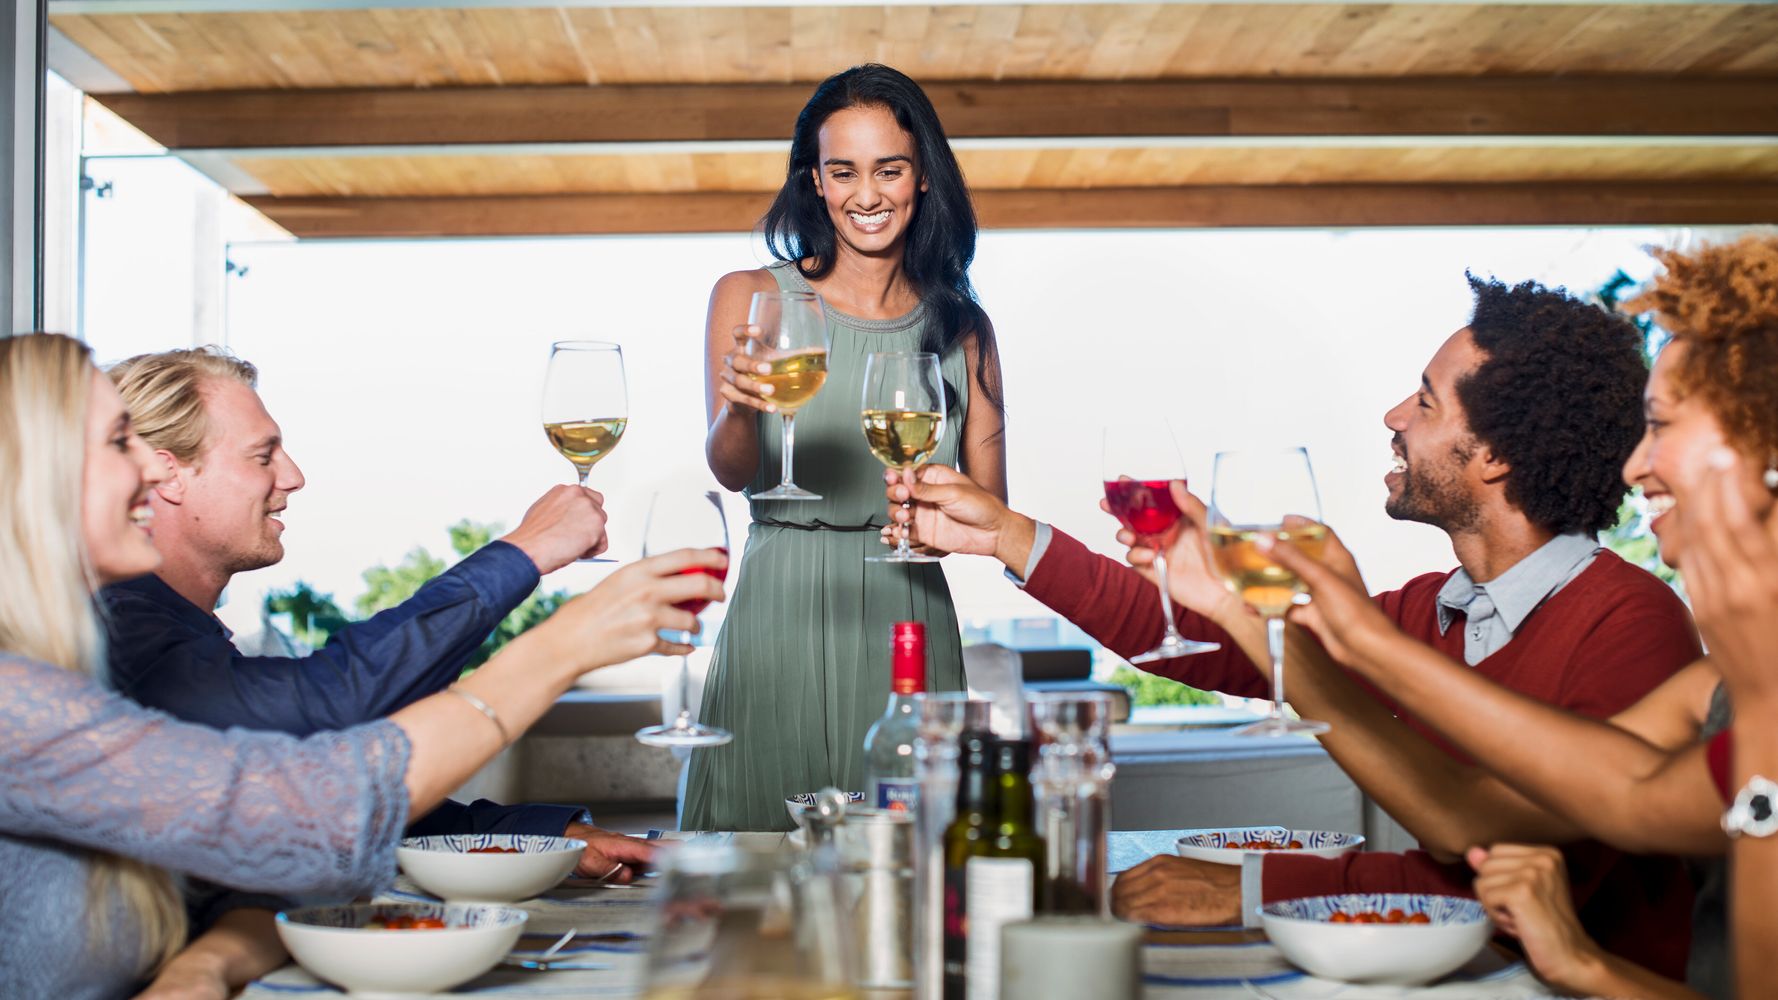 This Is The Best Time To Host A Dinner Party, According To Experts